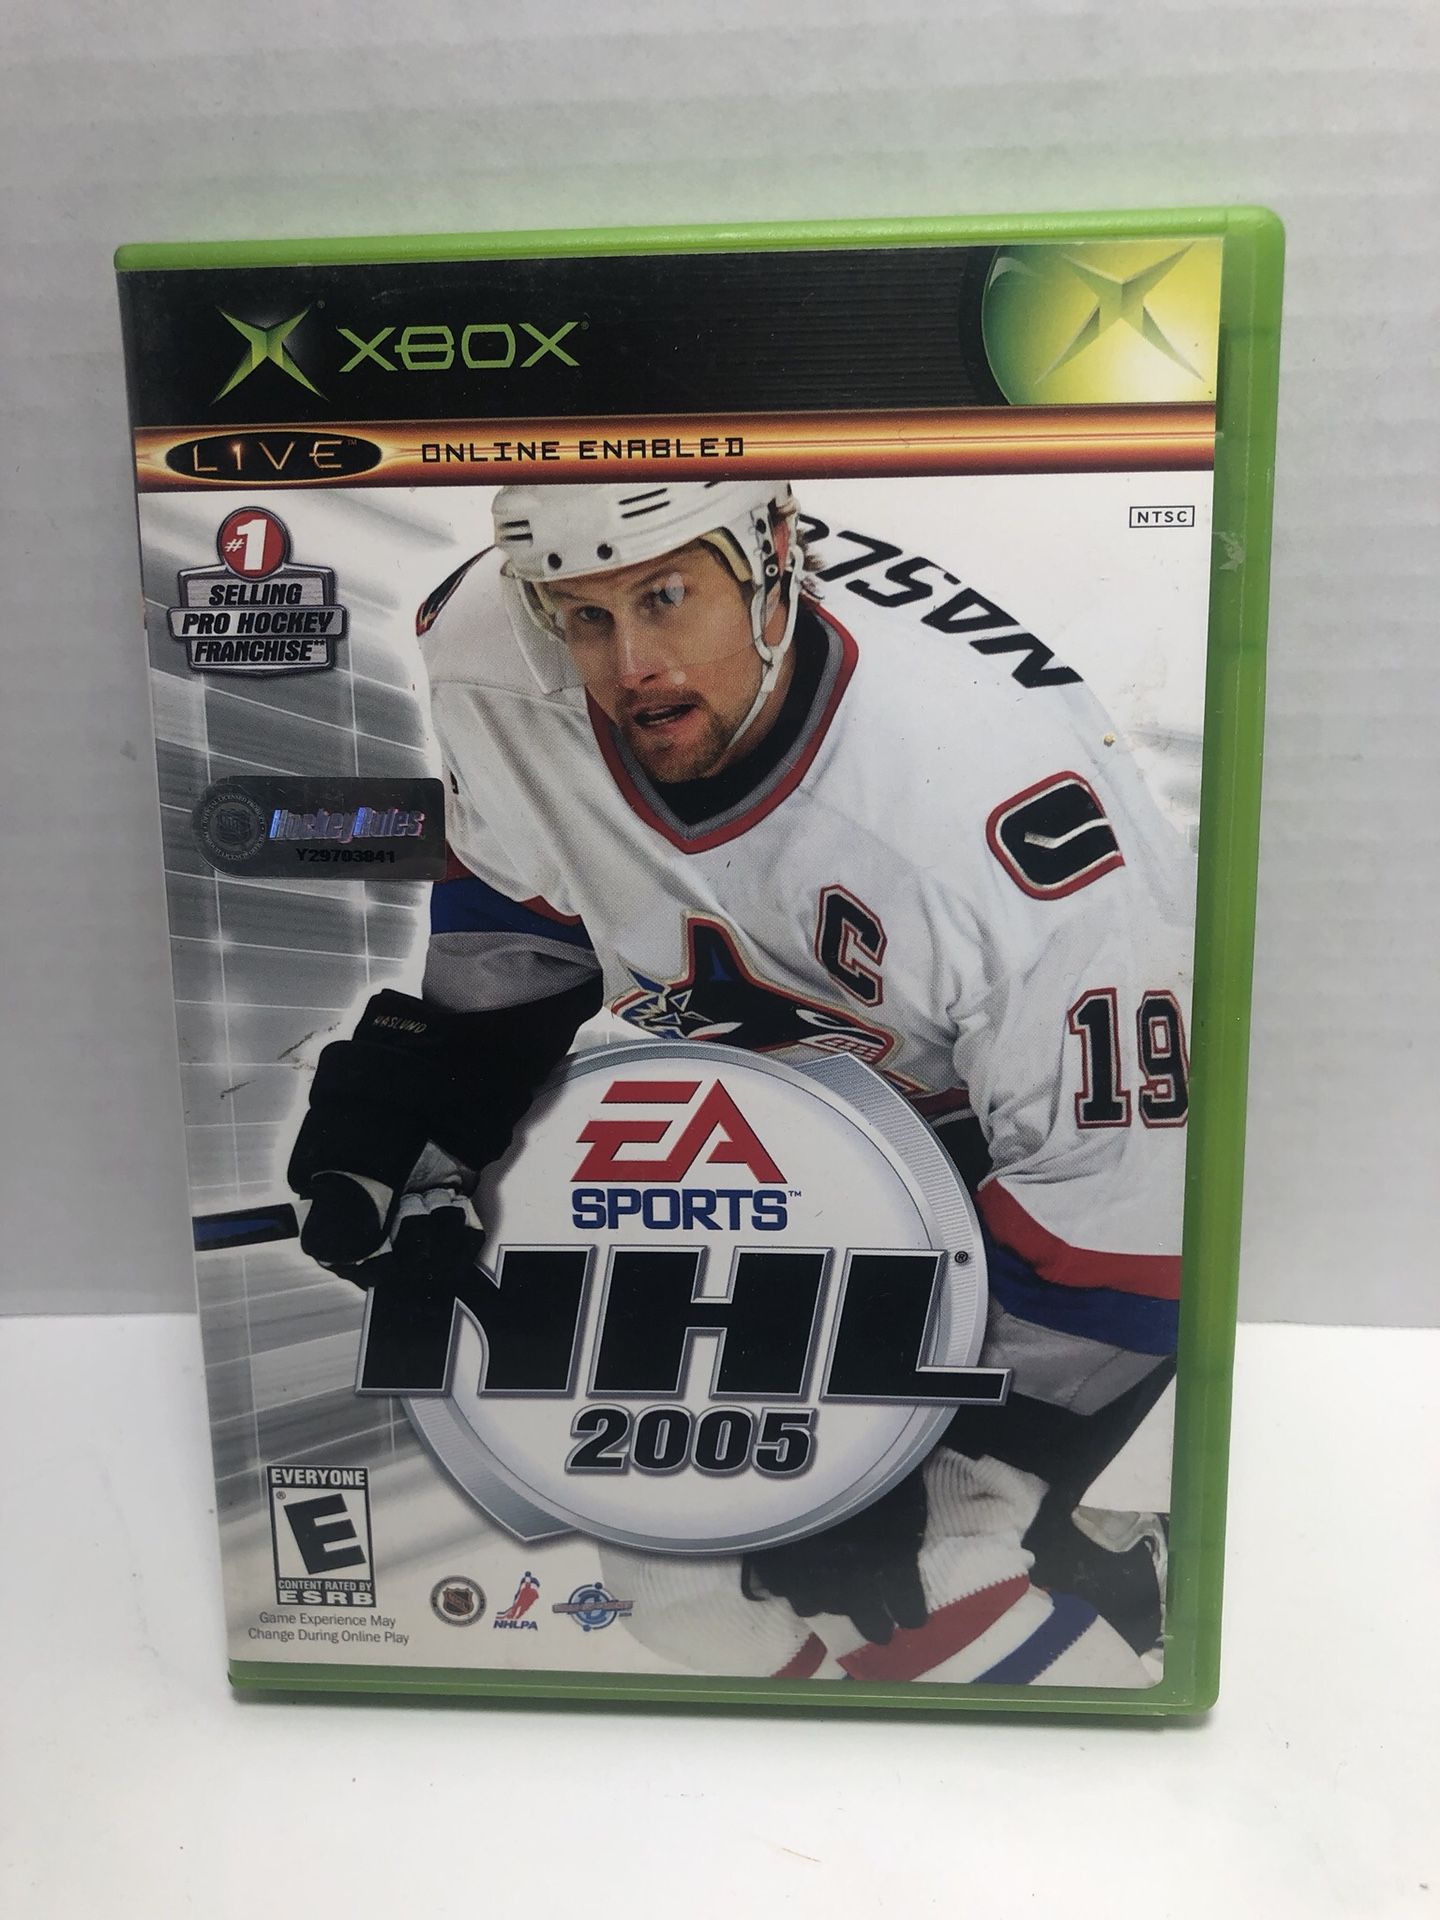 XBOX NHL Hockey 2005 complete with manual.